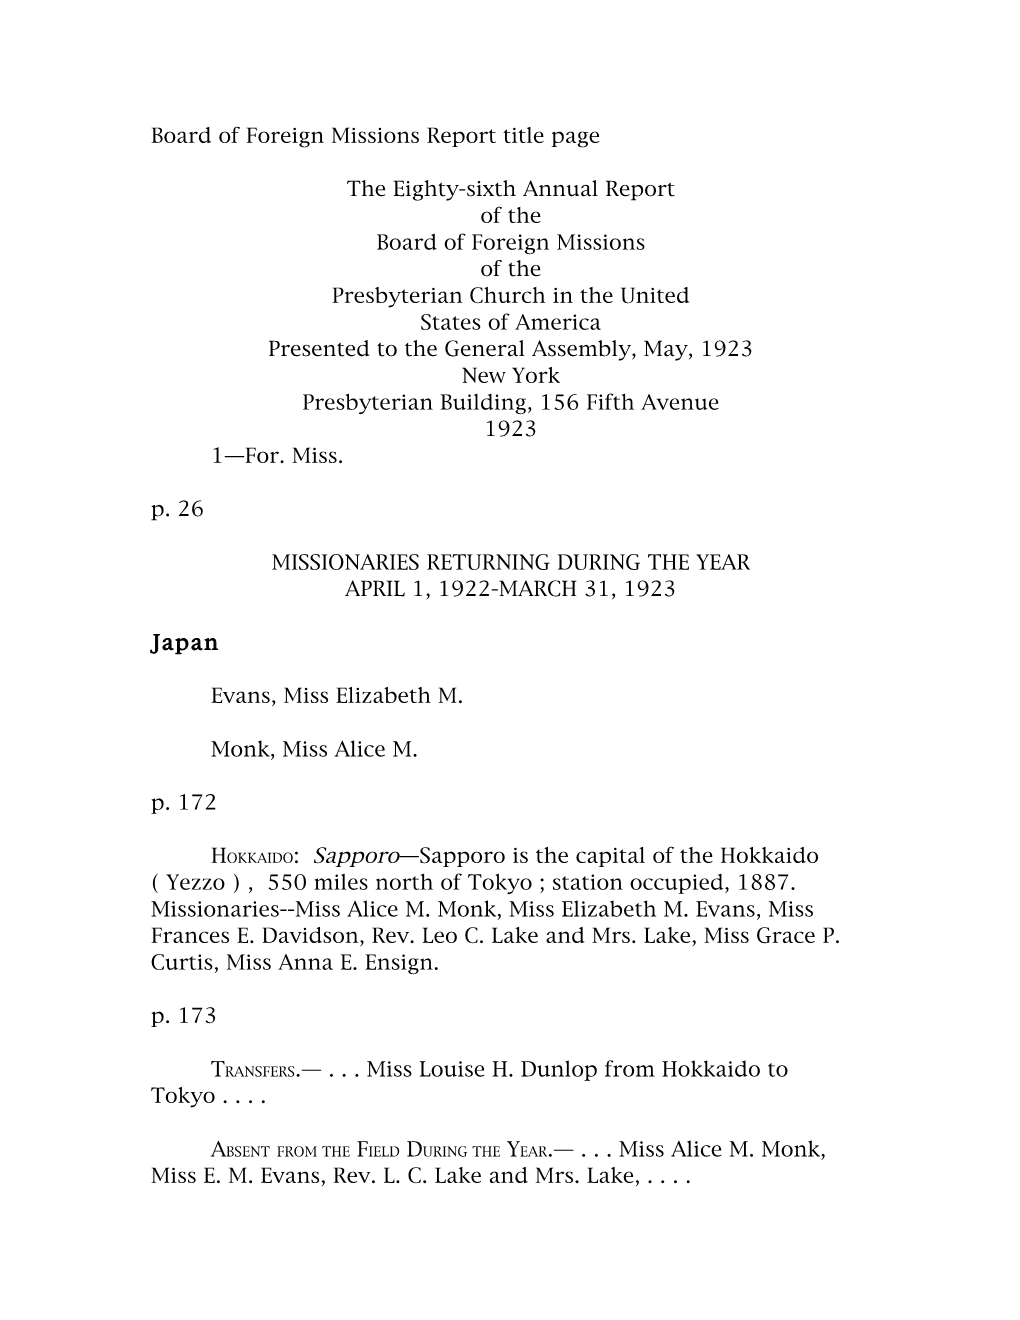 Board of Foreign Missions Report Title Page the Eighty-Sixth Annual